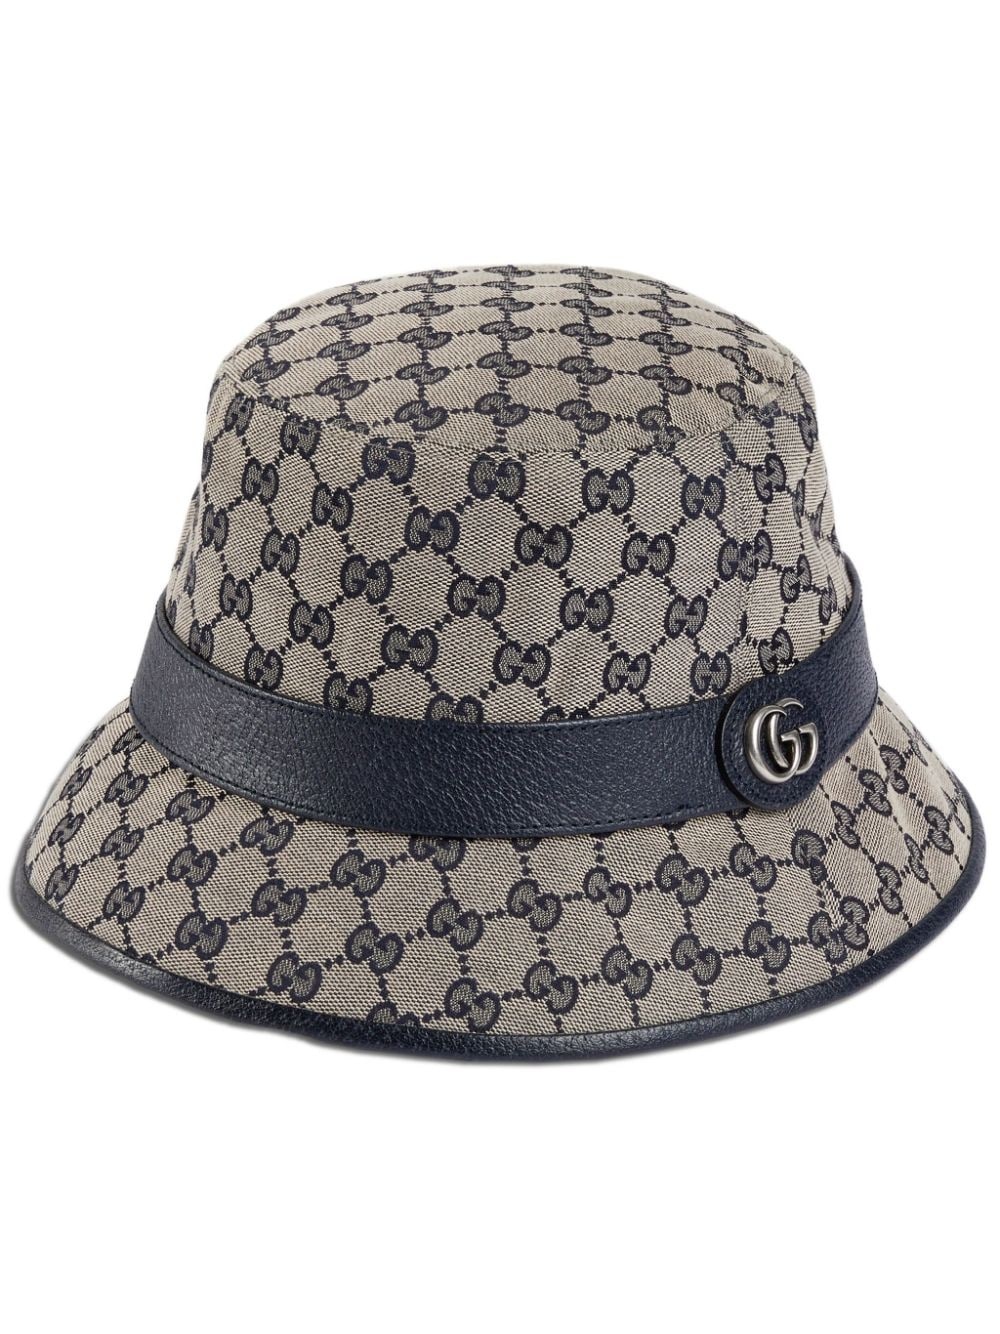 Gg fabric hat with double g - 1